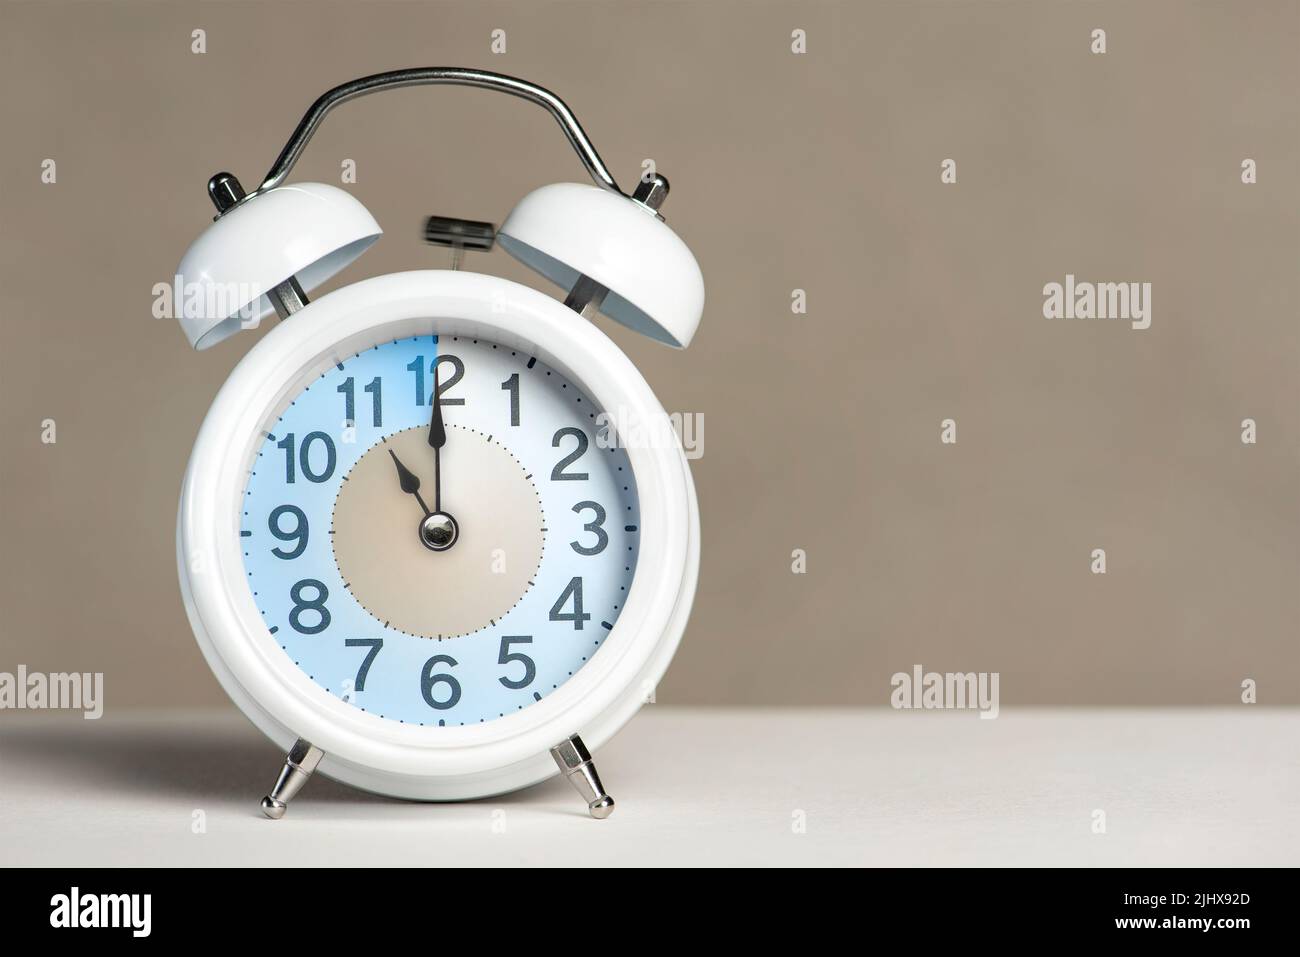 Eleven o'clock on the alarm. A white alarm clock is on a white table. The clock hand points to 11 o'clock. Time to change to summer or winter time Stock Photo